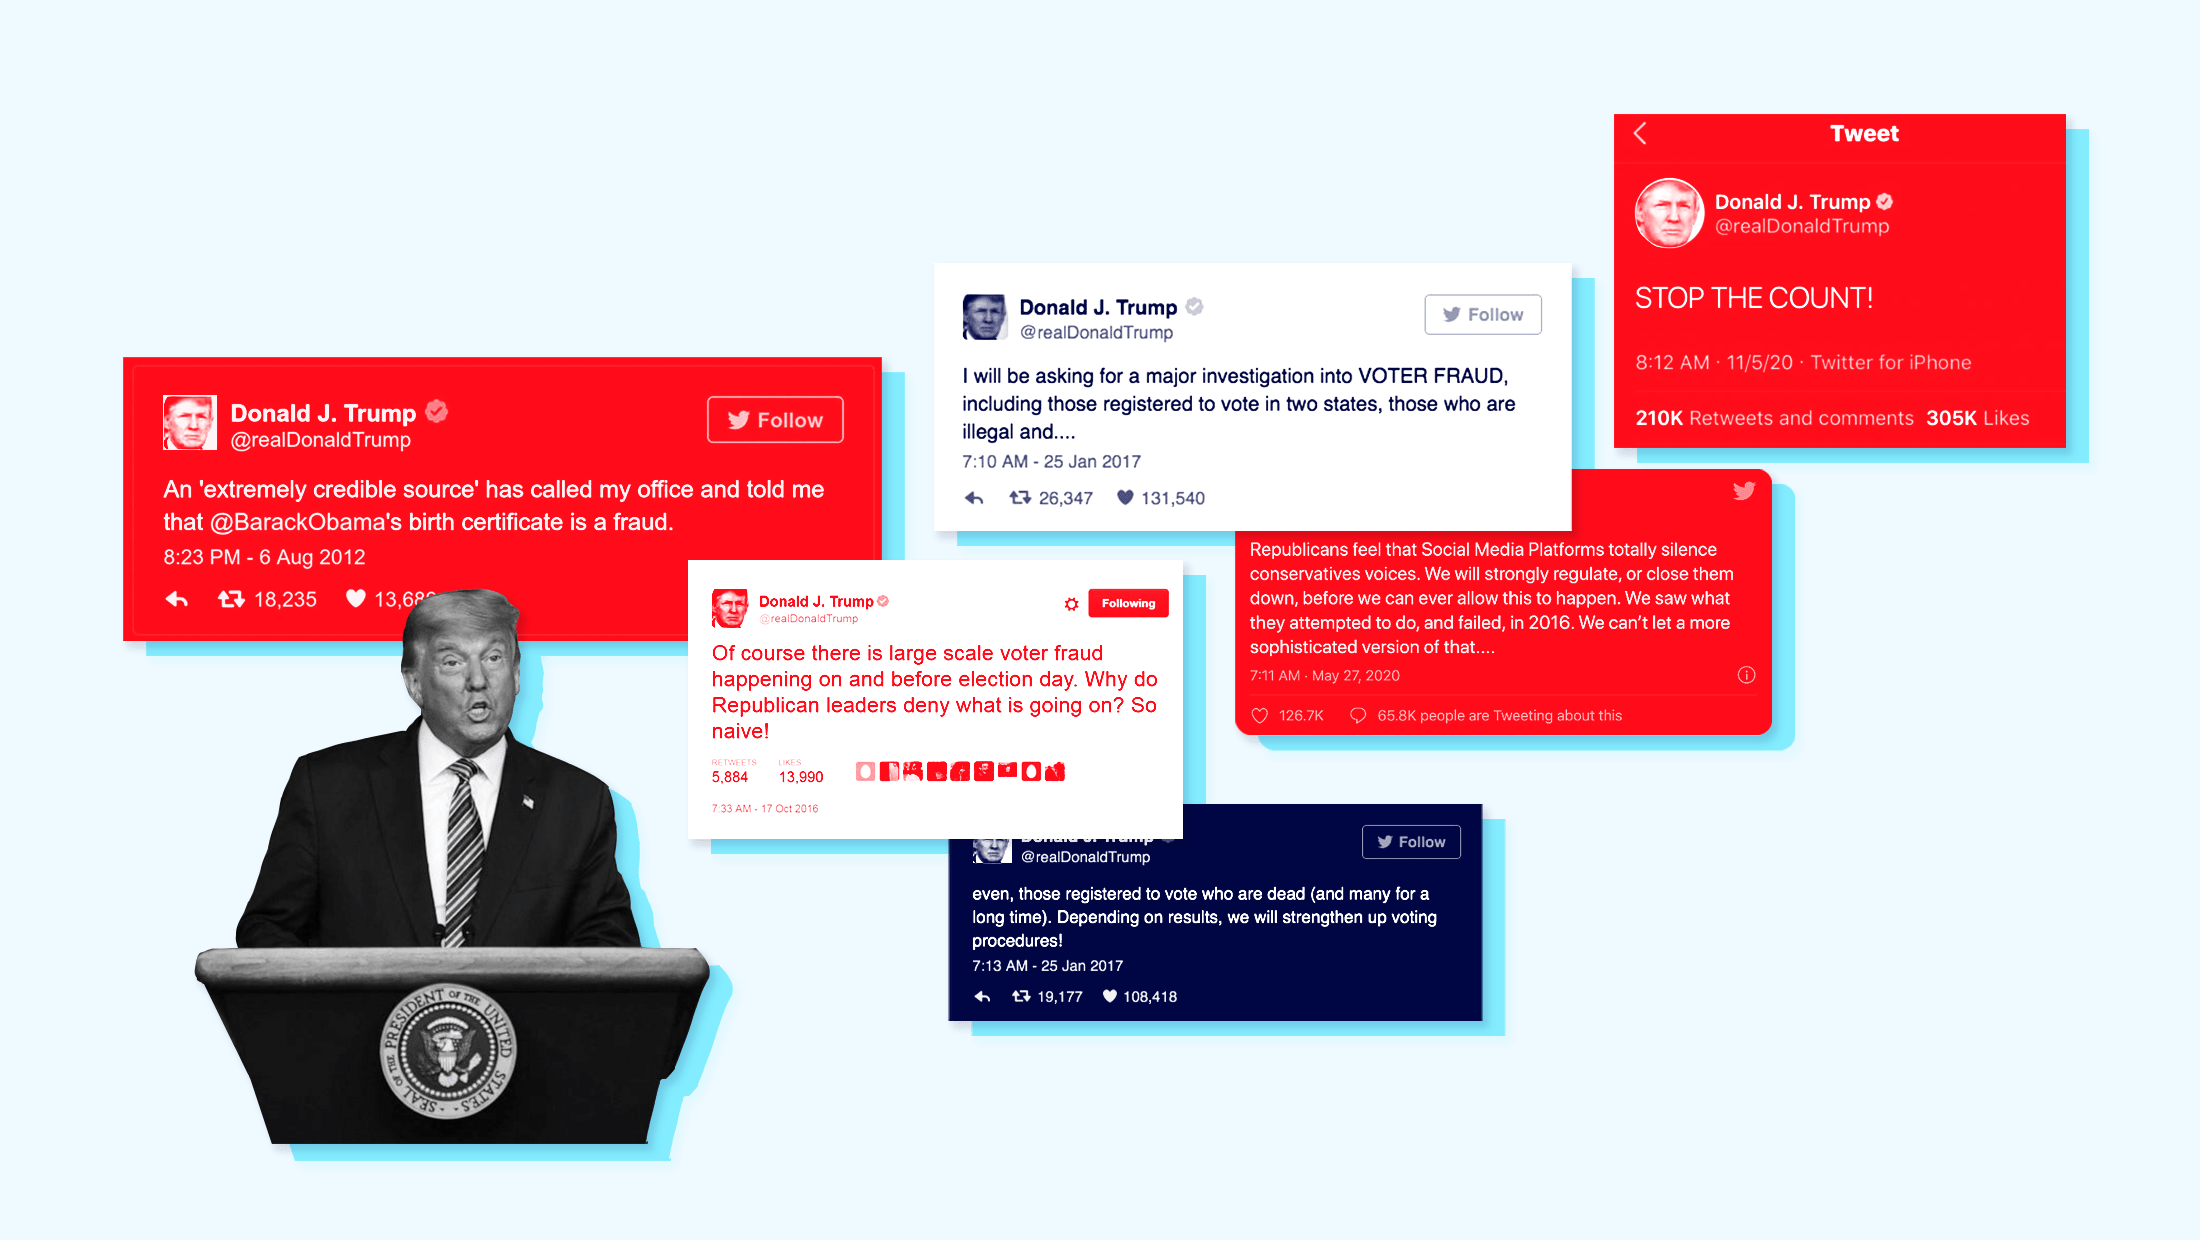 Light blue background with image of former President Donald Trump at the presidential podium surrounded by screenshots of his tweets about voter fraud, birtherism, stop the count and general election denying rhetoric.